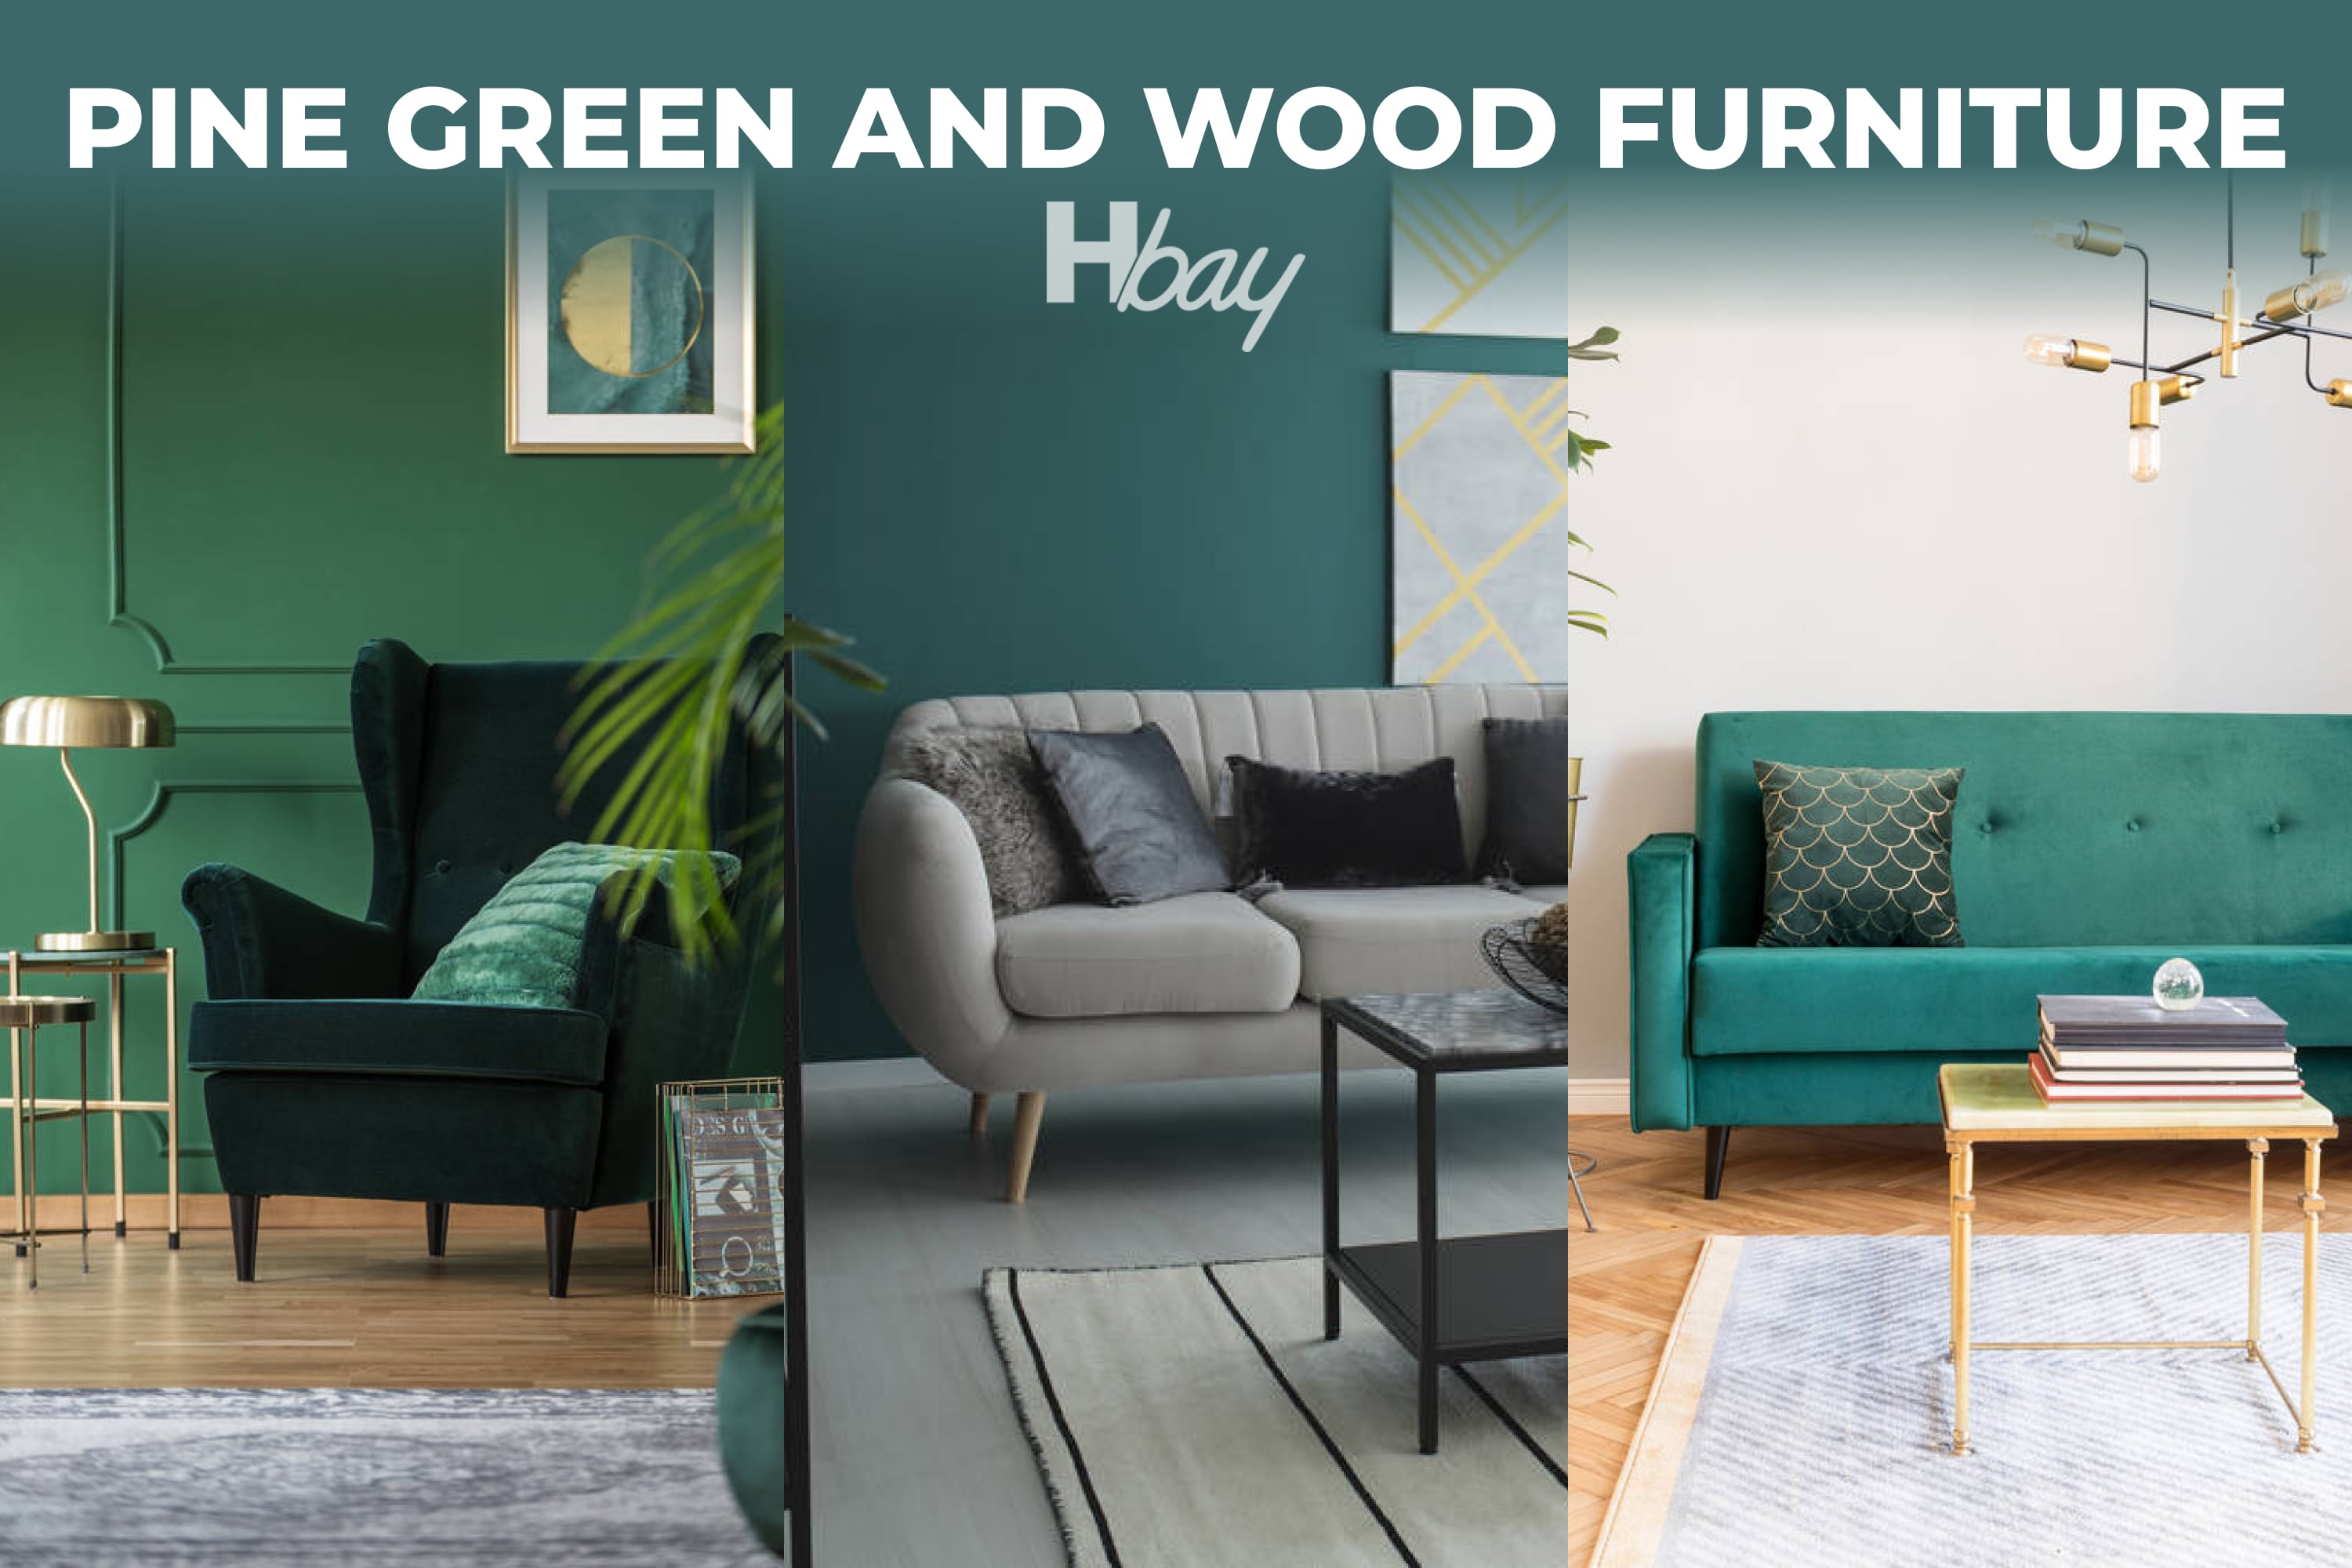 Pine green and wood furniture